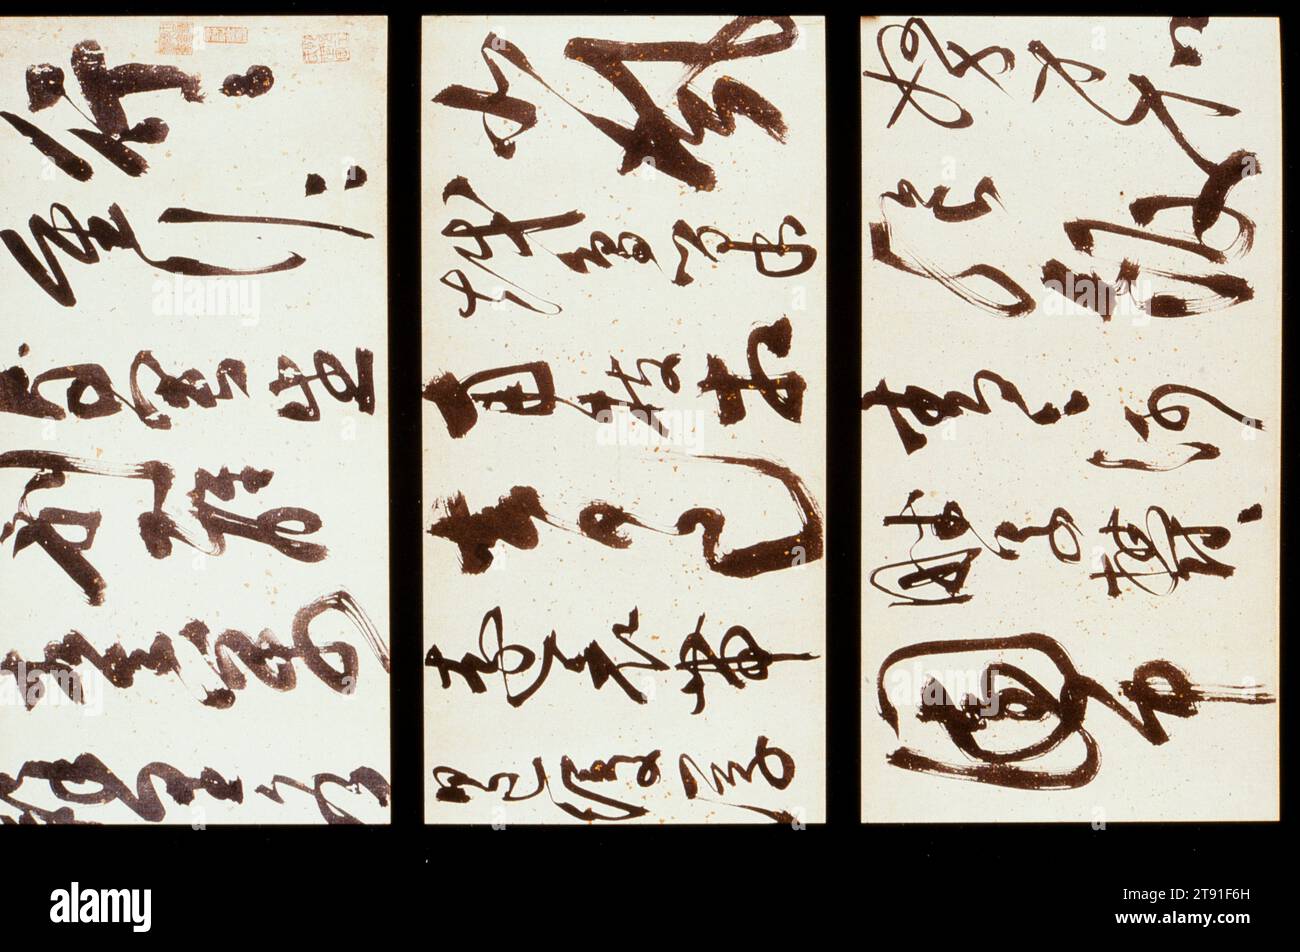 Three Ancient Poems in Cursive Script, c. 1535, Chen Chun, Chinese, 1483 - 1544, 11 9/16 x 365 3/4 in. (29.37 x 929.01 cm) (image), Ink on paper, China, 16th century, Chen Chun, one of the most important Ming dynasty calligraphers and flower painters, was born into a modestly prosperous literati family. His first teacher was the great literatus, Wen Zhengming (1470-1559), and between 1519 and 1523 he studied at the Imperial Academy in Beijing. While initially influenced by the writing style of Wen Zhengming, Chen quickly developed a personal approach Stock Photo